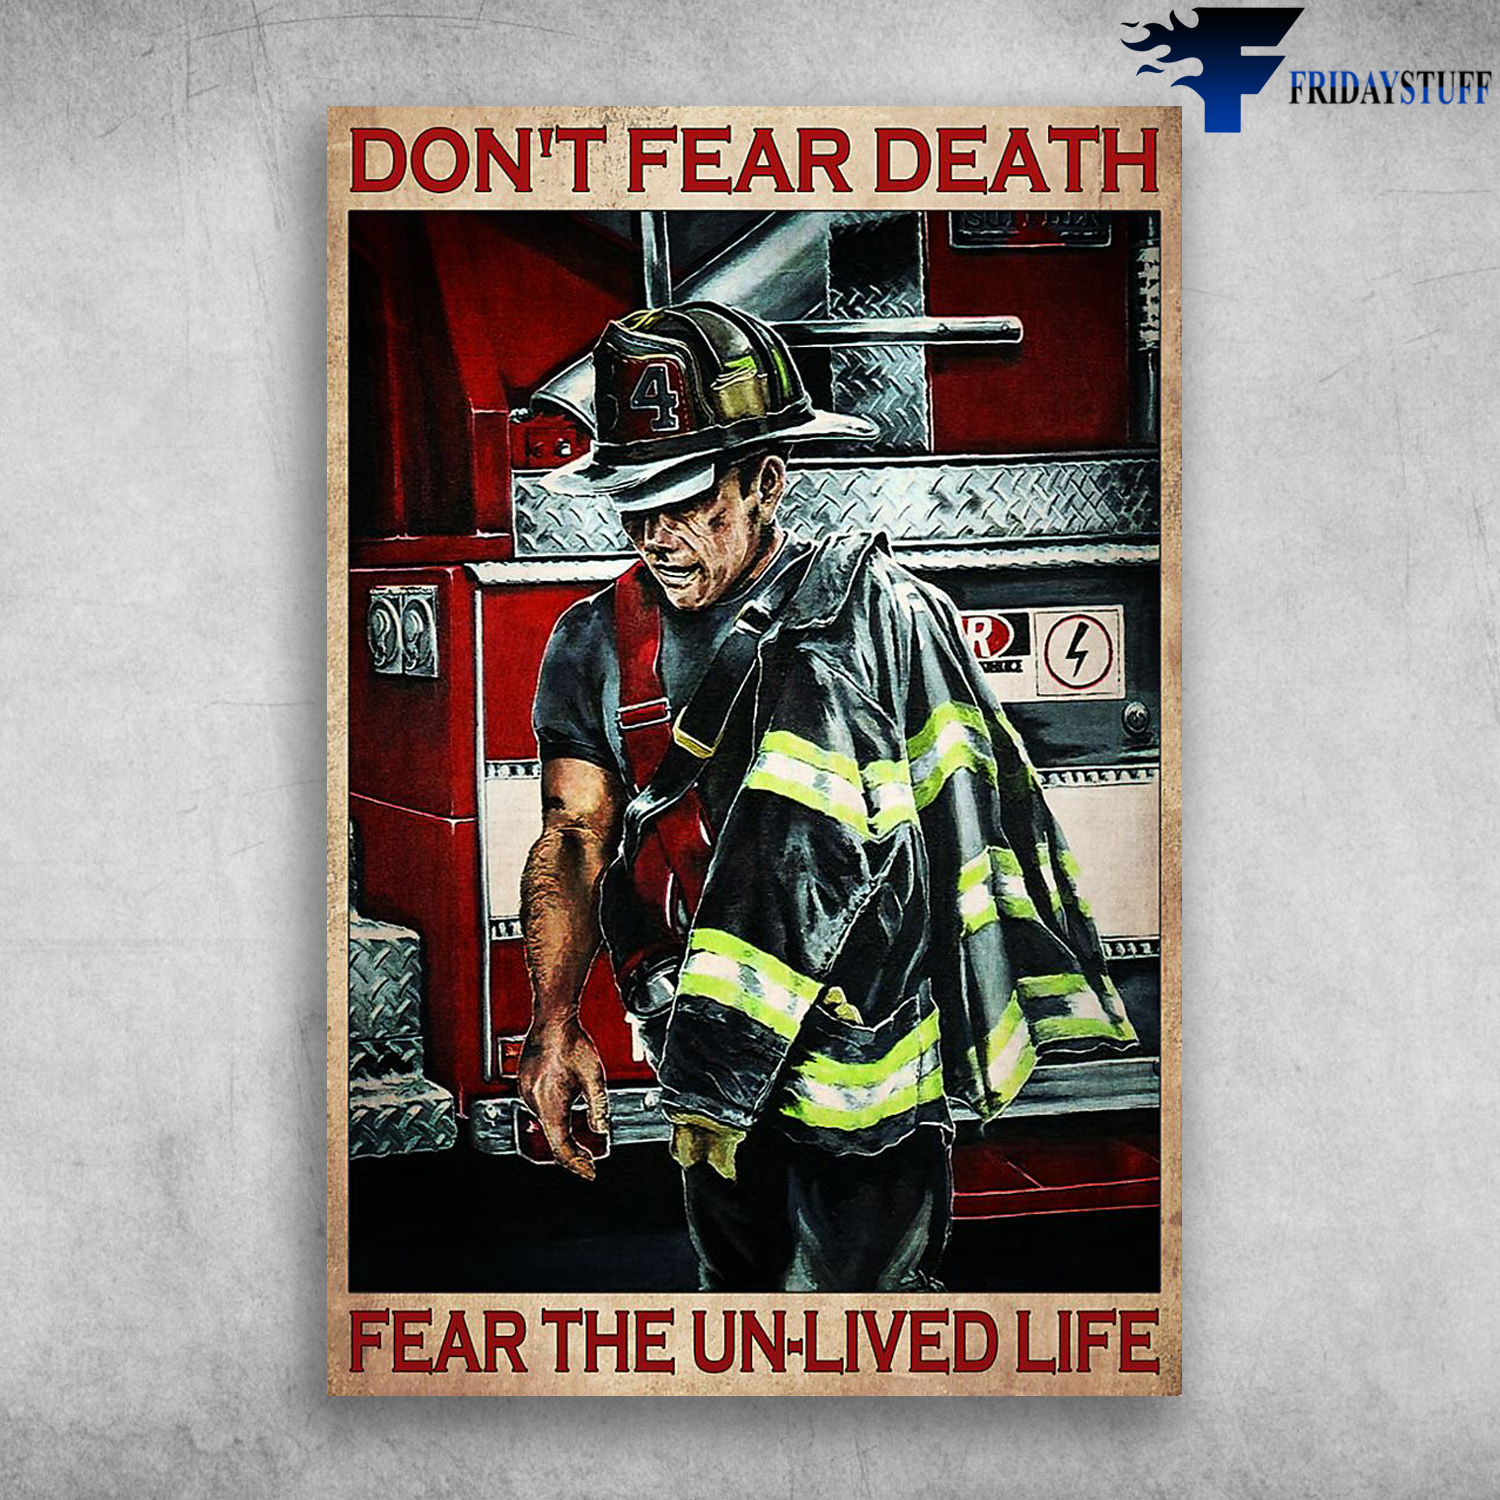 Firefighter Beside The Fire Truck - Don't Fear Death Fear The Unlived Life